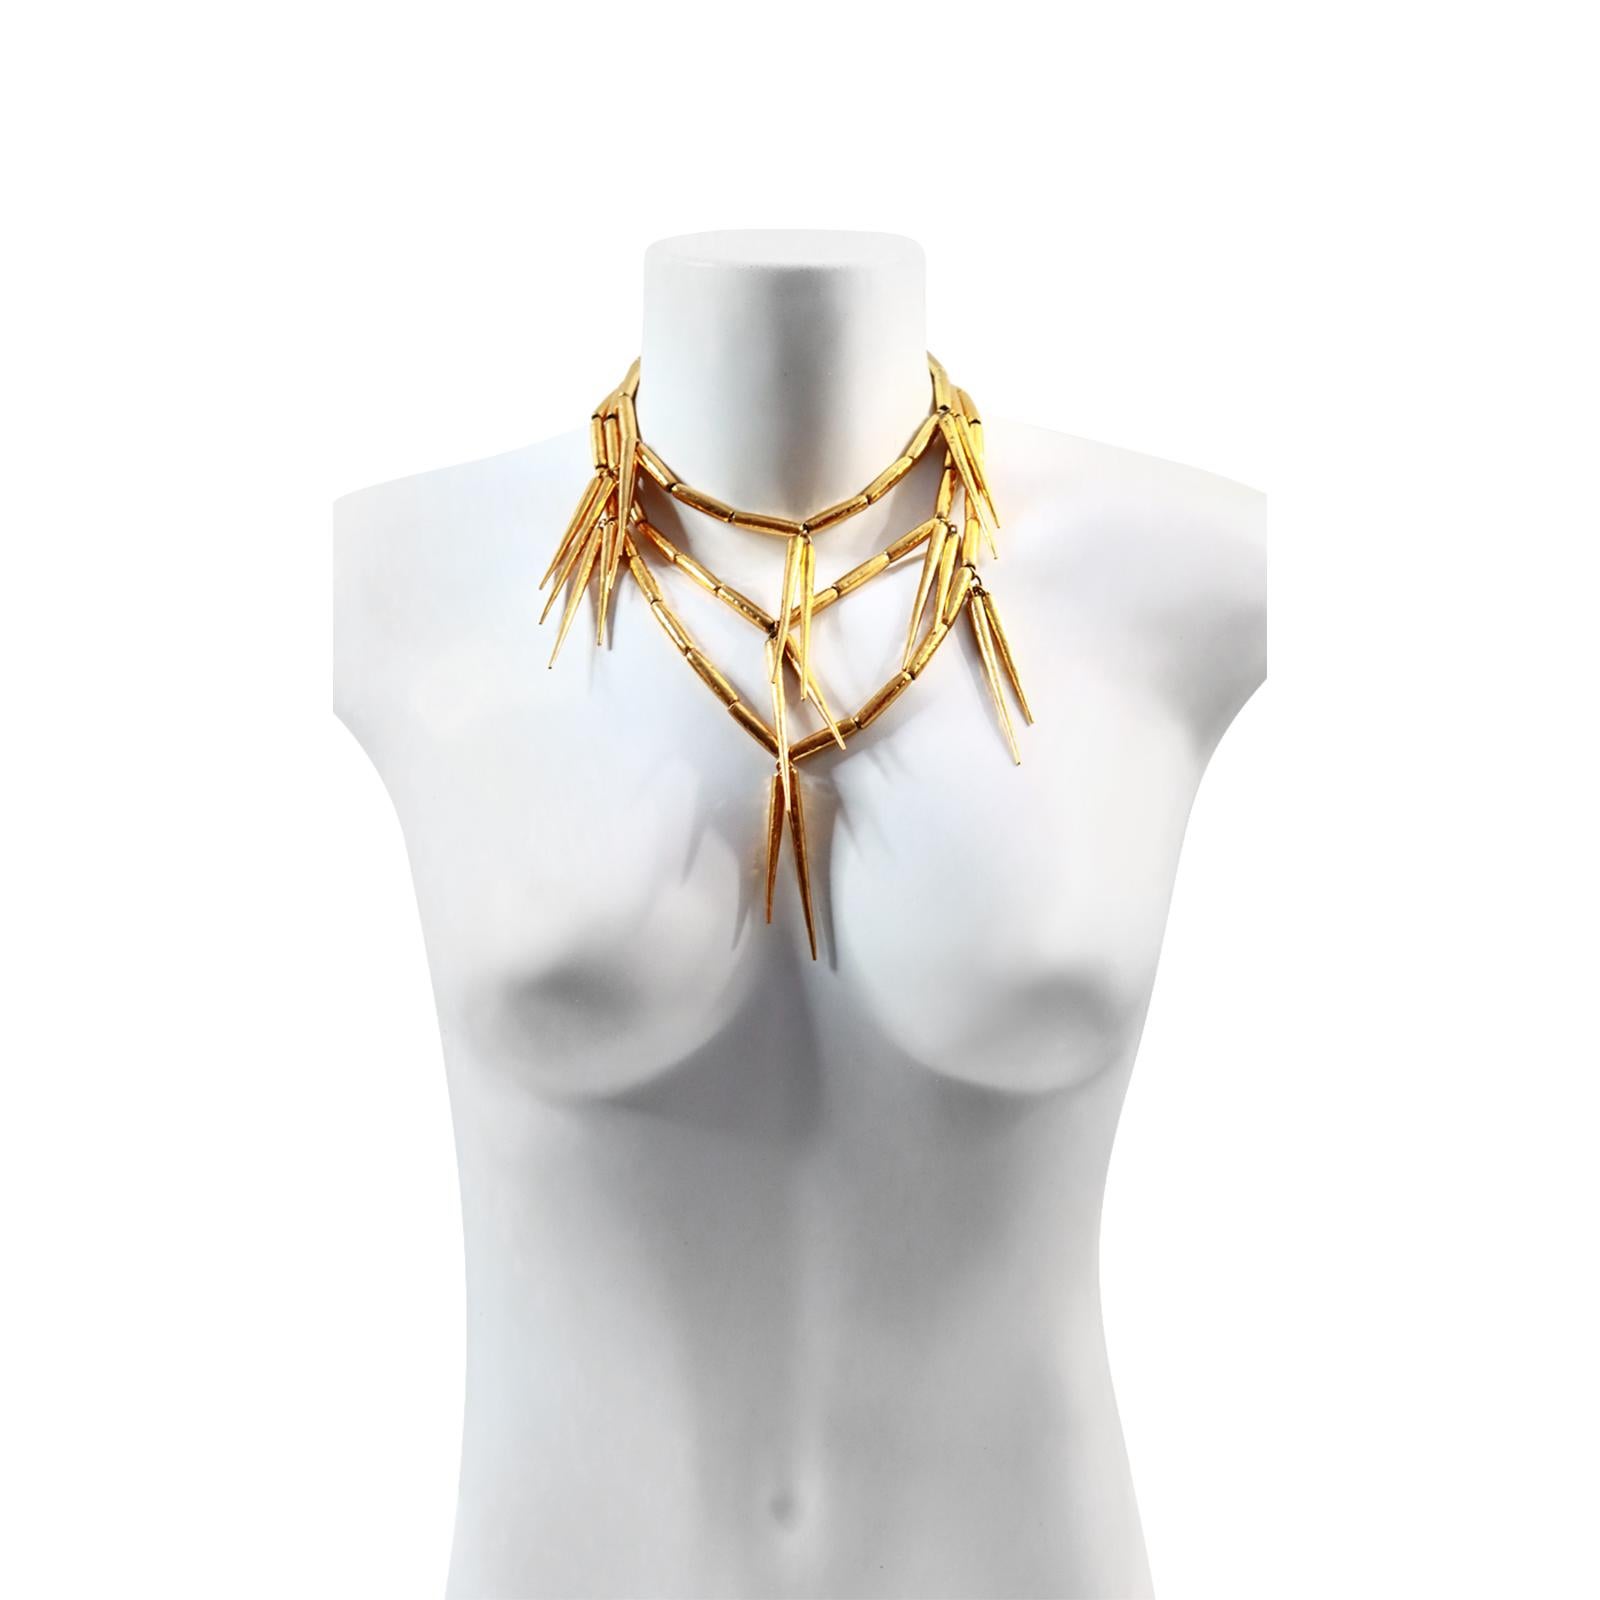 Vintage Christian Dior Gold Spike Necklace Circa 1980s For Sale 3